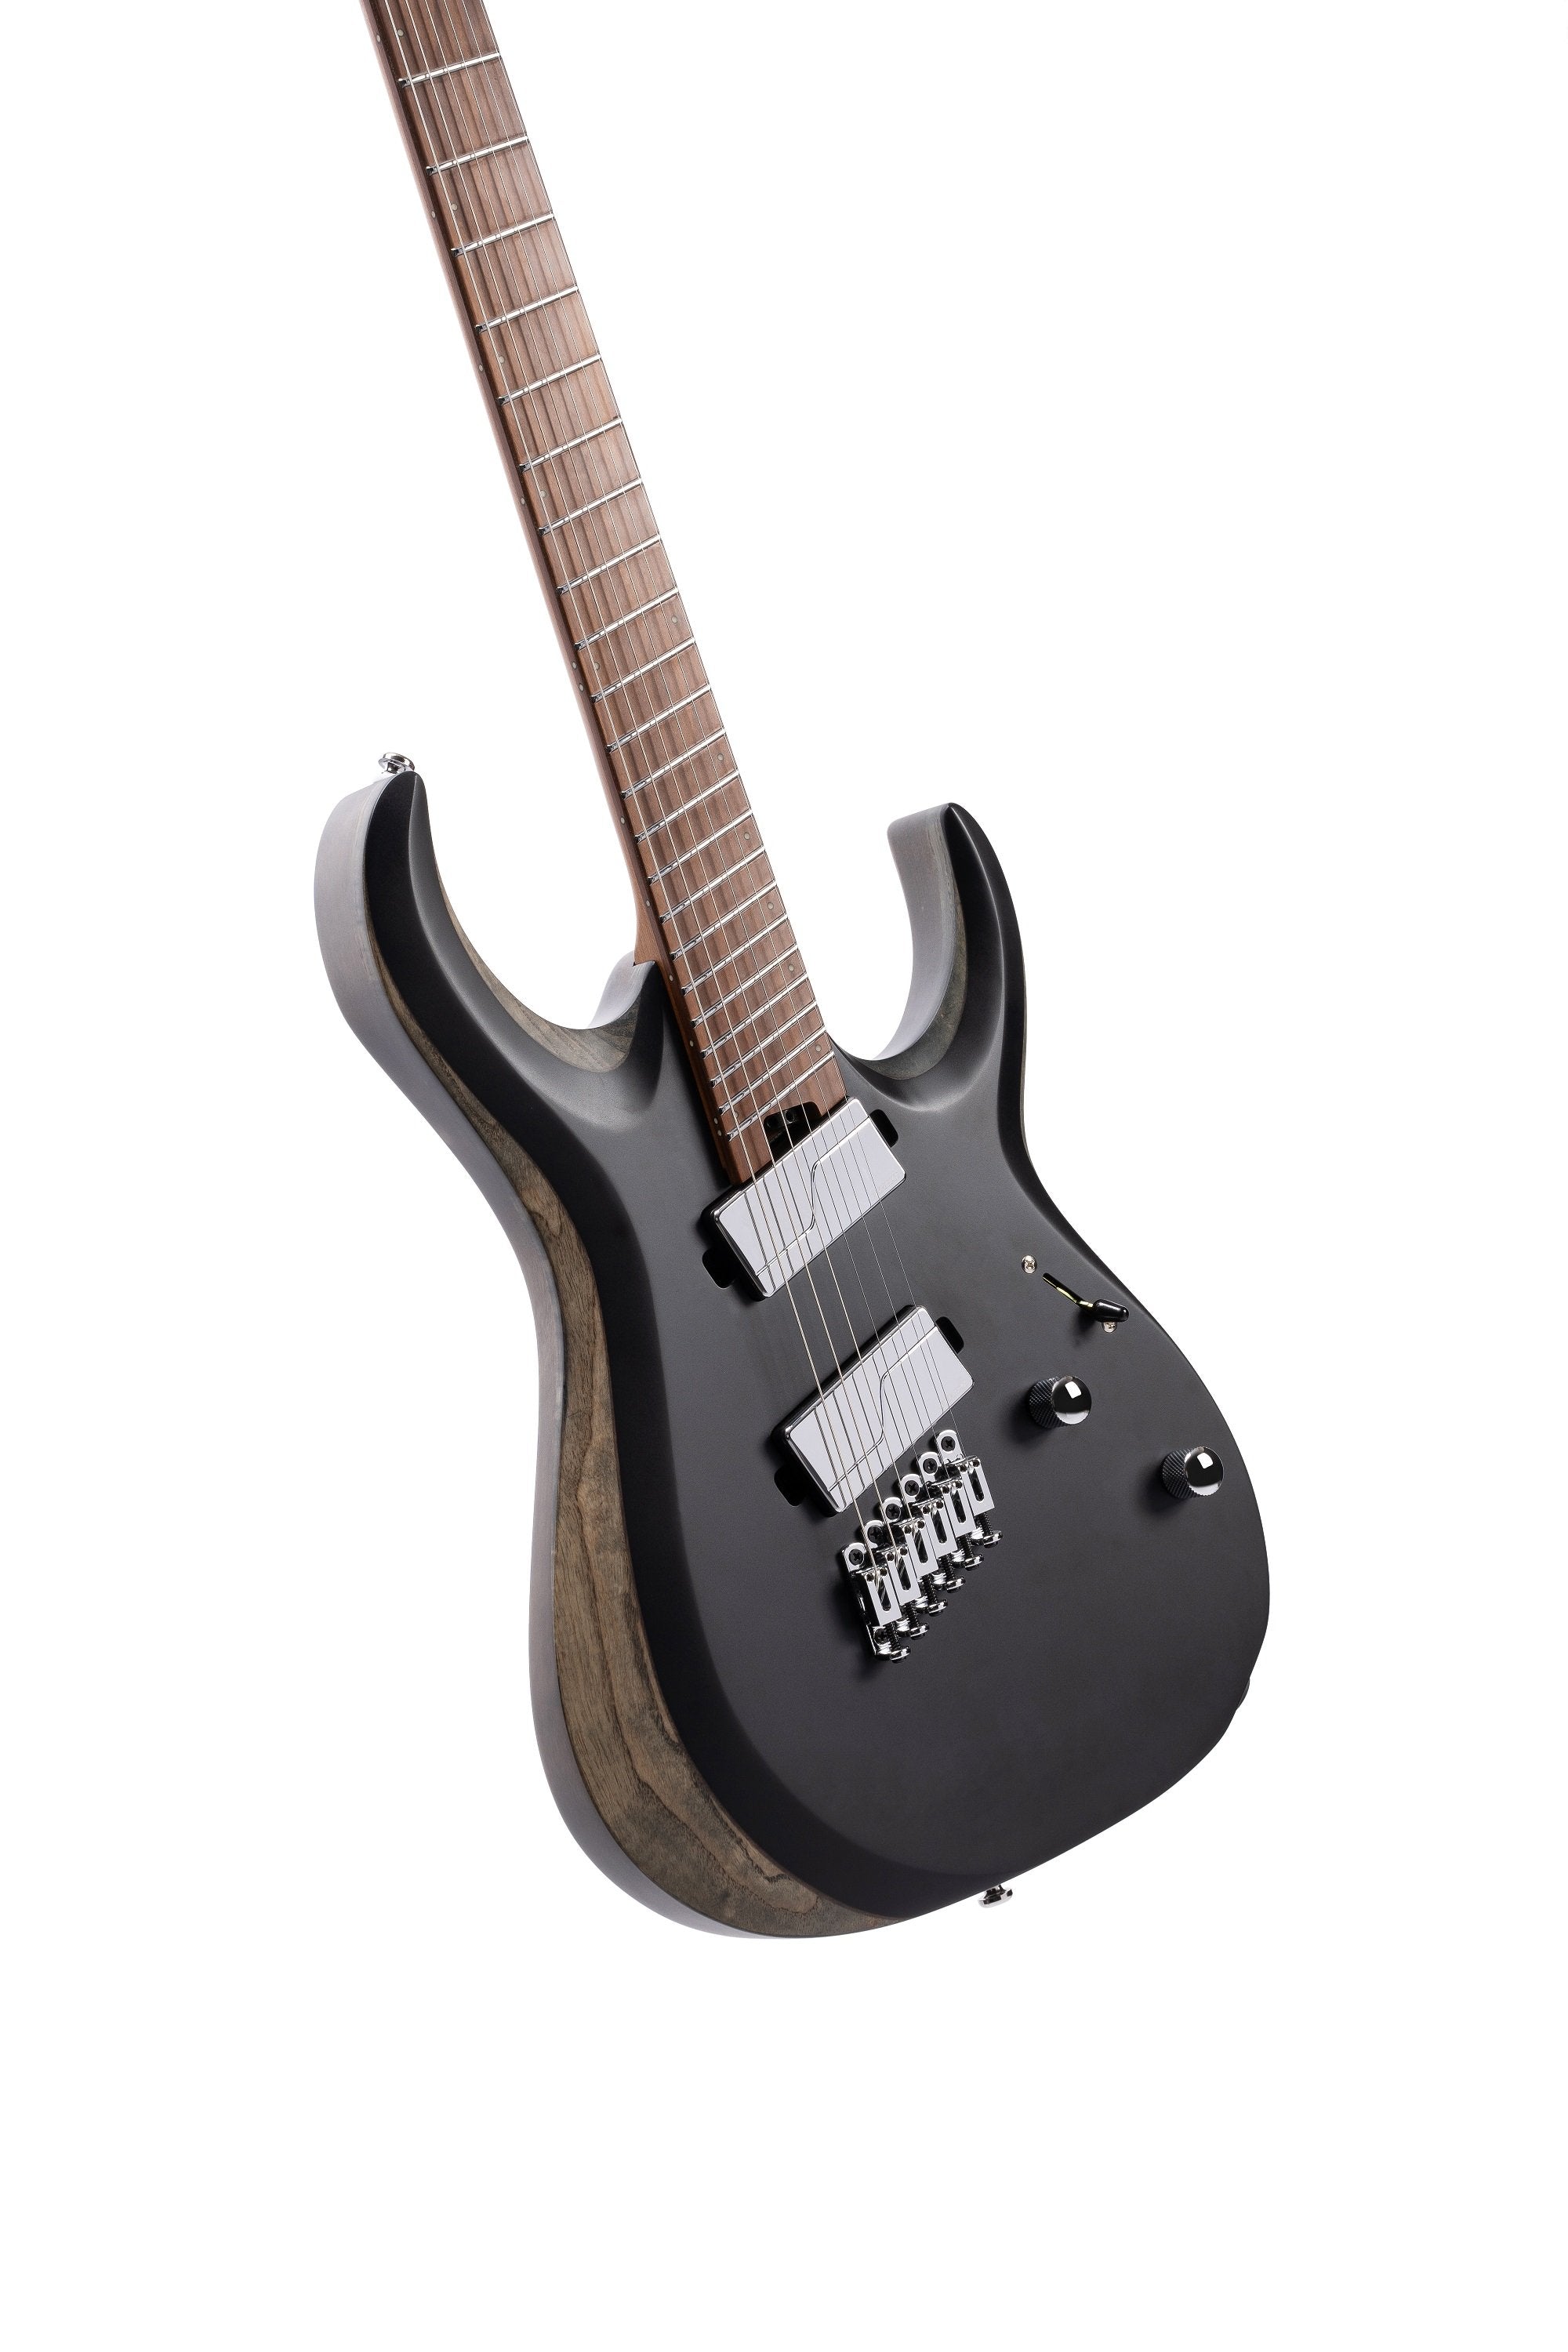 Cort X700 Mutility Black Satin w/bag, Electric Guitar for sale at Richards Guitars.